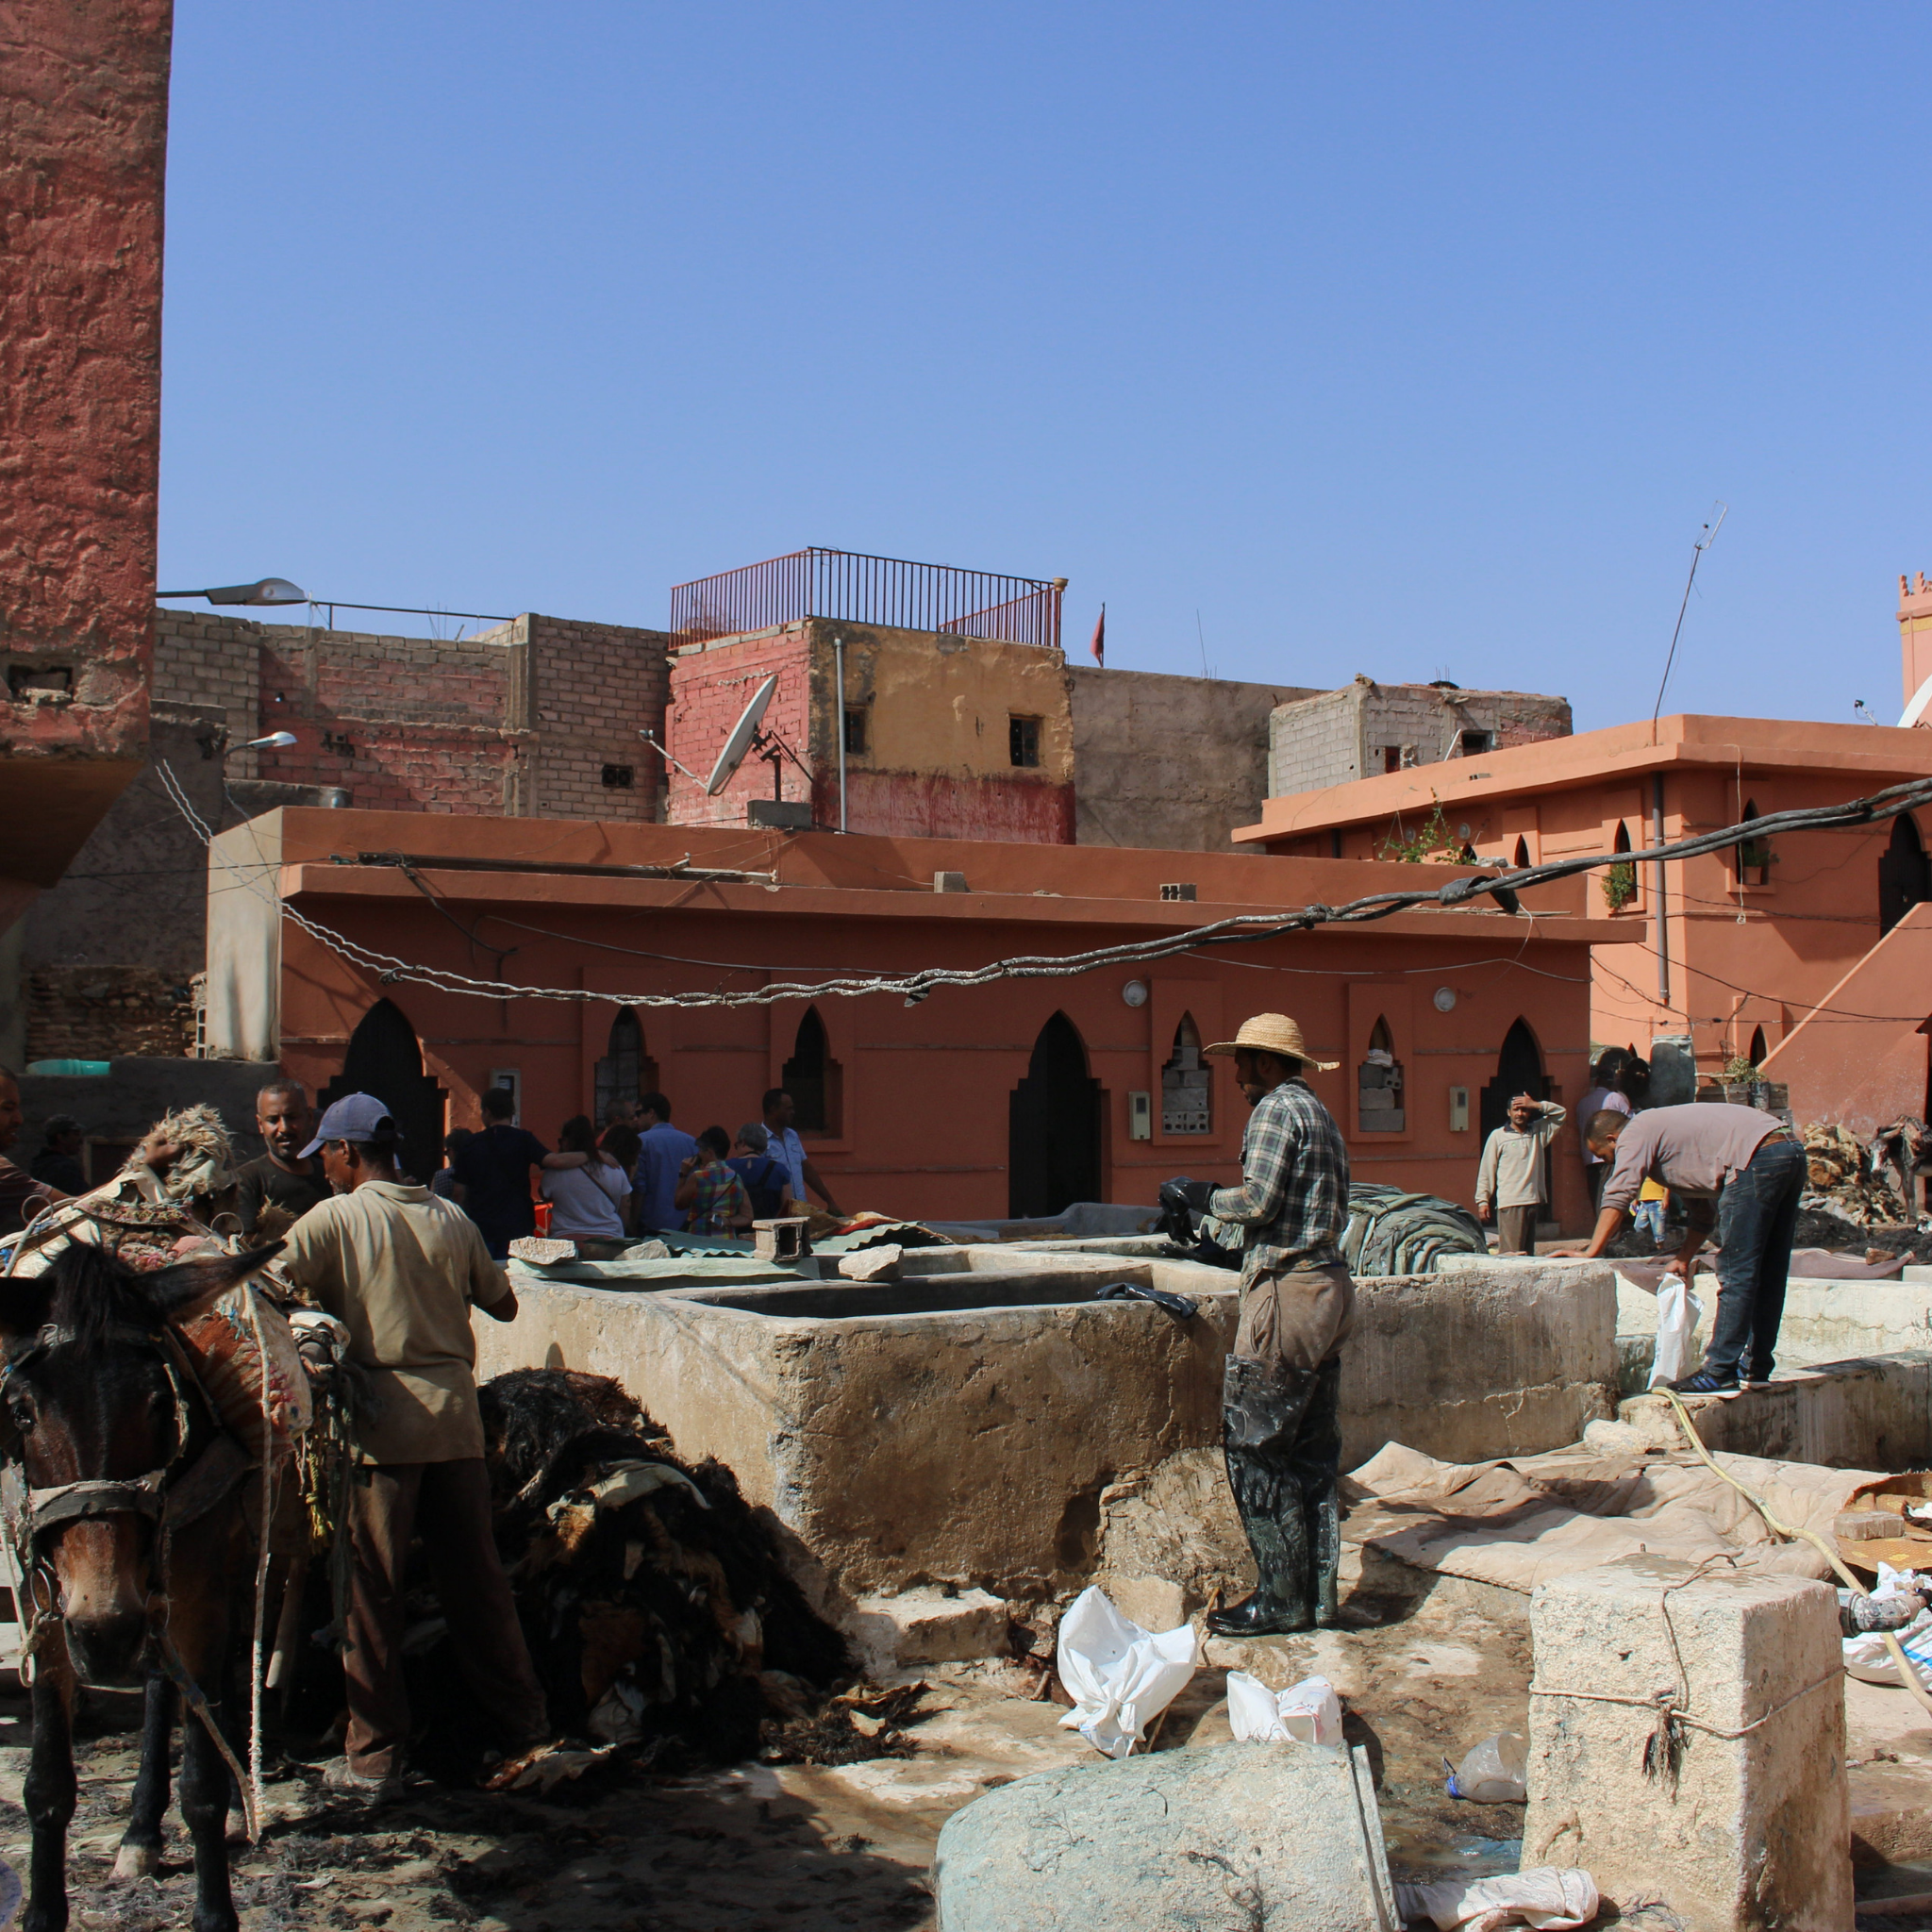 Moroccan leather tannery in Marrakech Top 5 places to visit